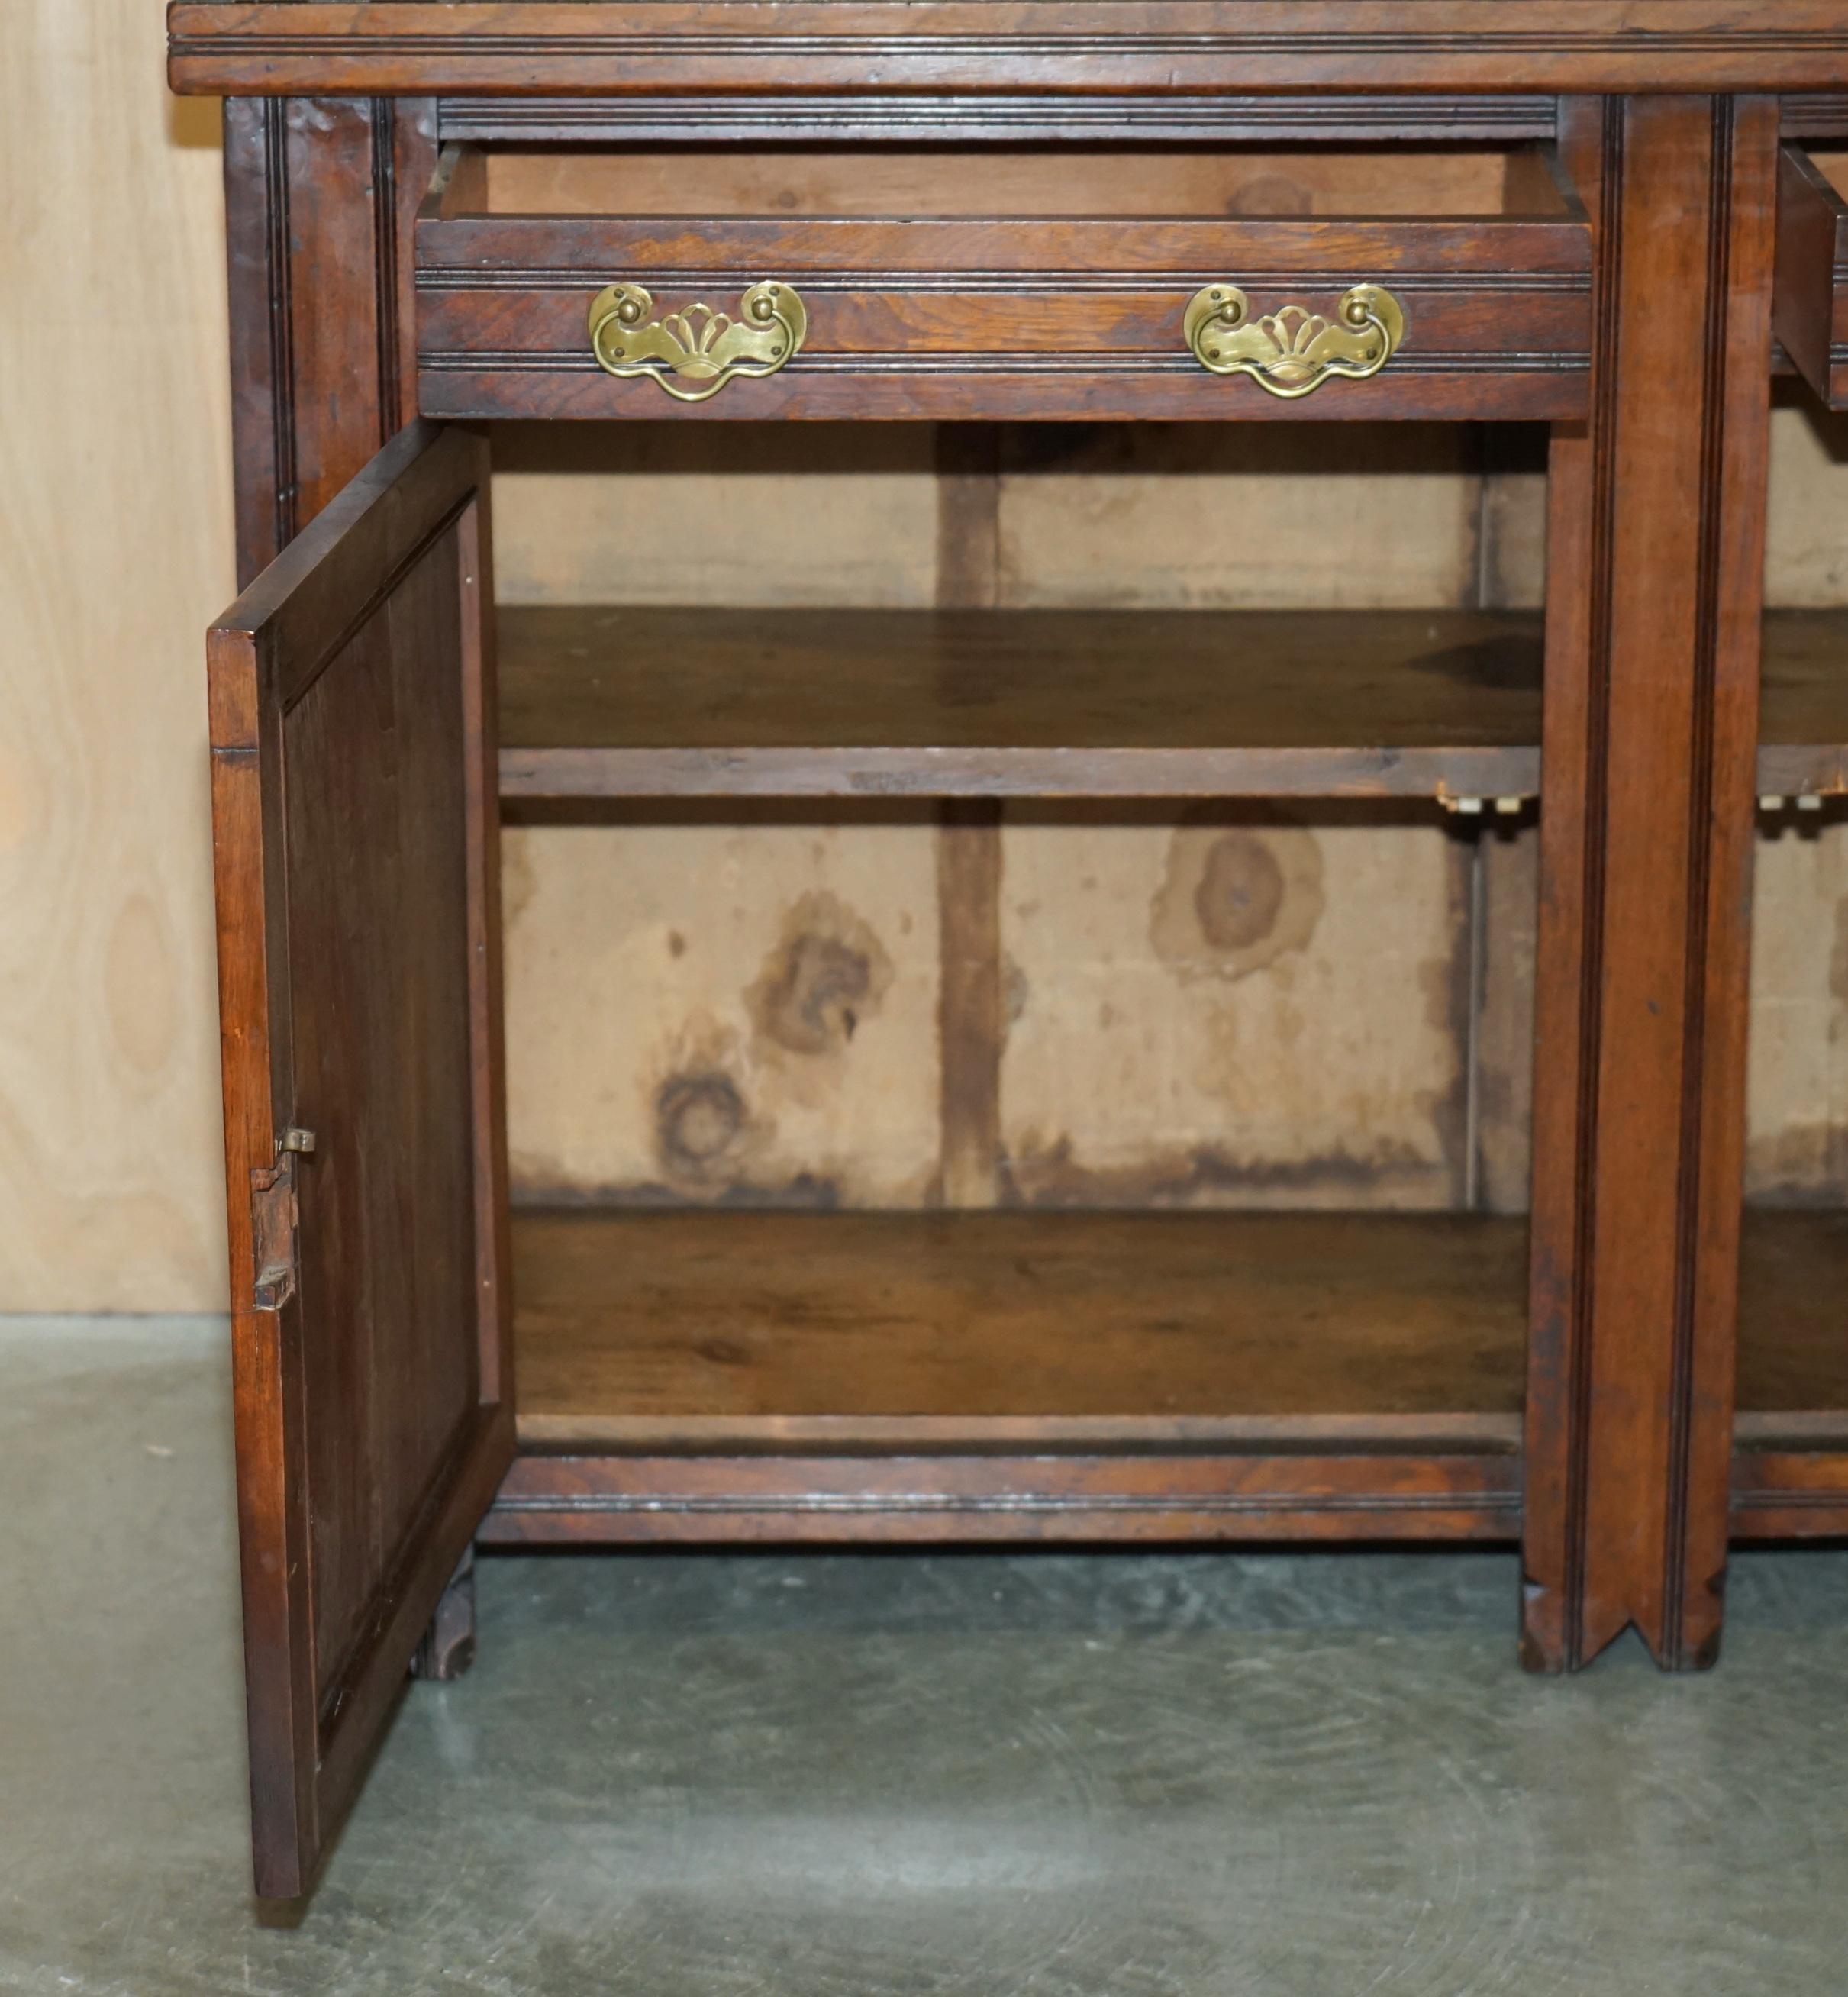 ANTIQUE ENGLISH COUNTRY OAK CiRCA 1880 VICTORIAN SIDEBOARD BASE WITH DRAWERS For Sale 9